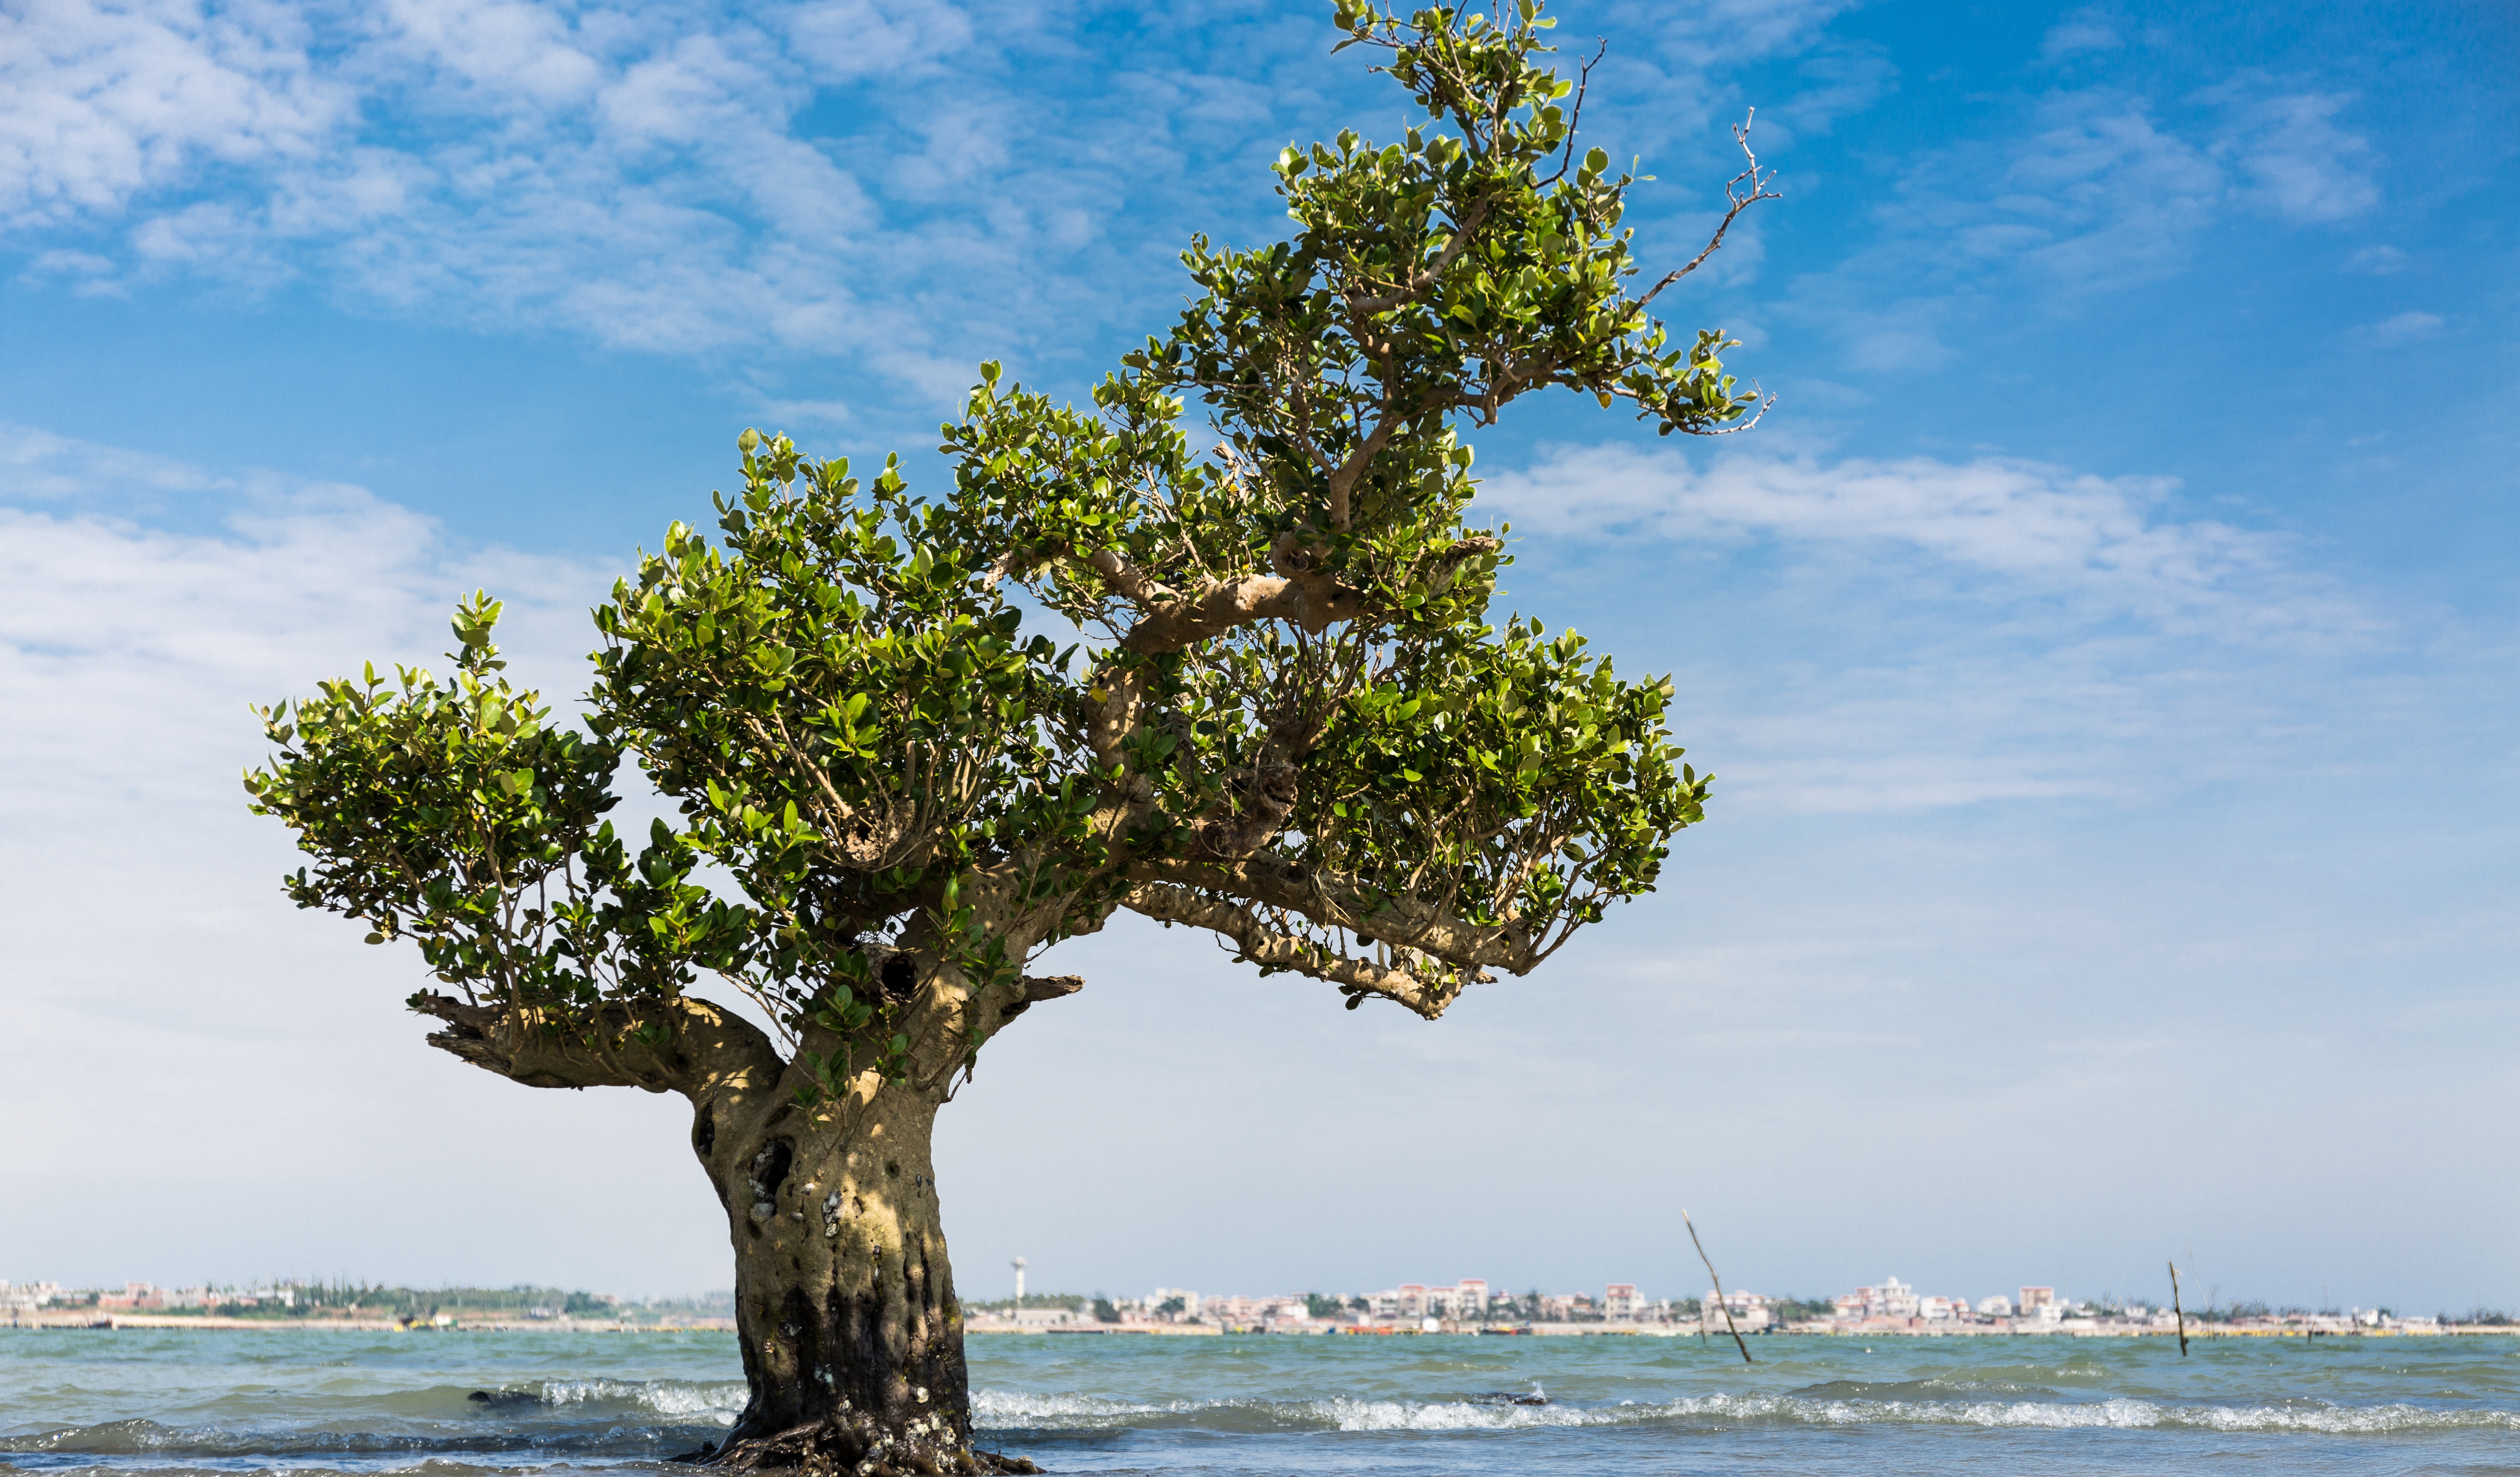 Guangdong plans to cultivate 2,600 hectares of mangroves